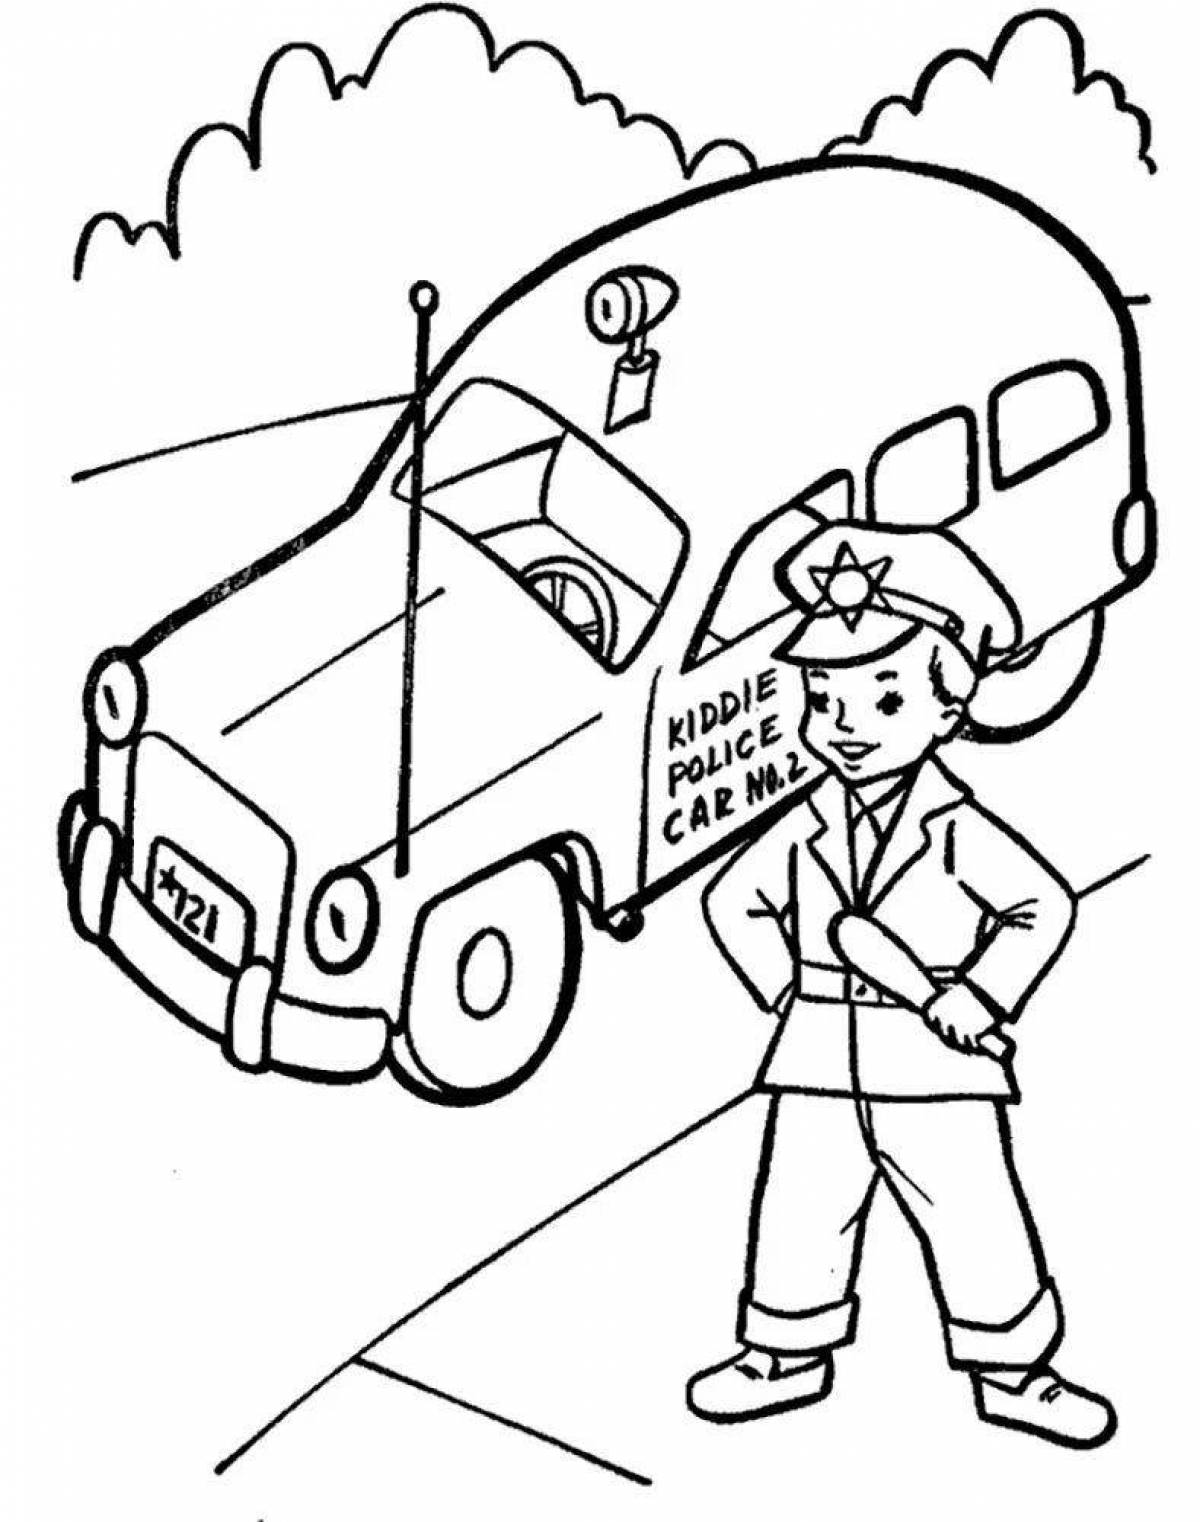 Animated coloring book for police kids